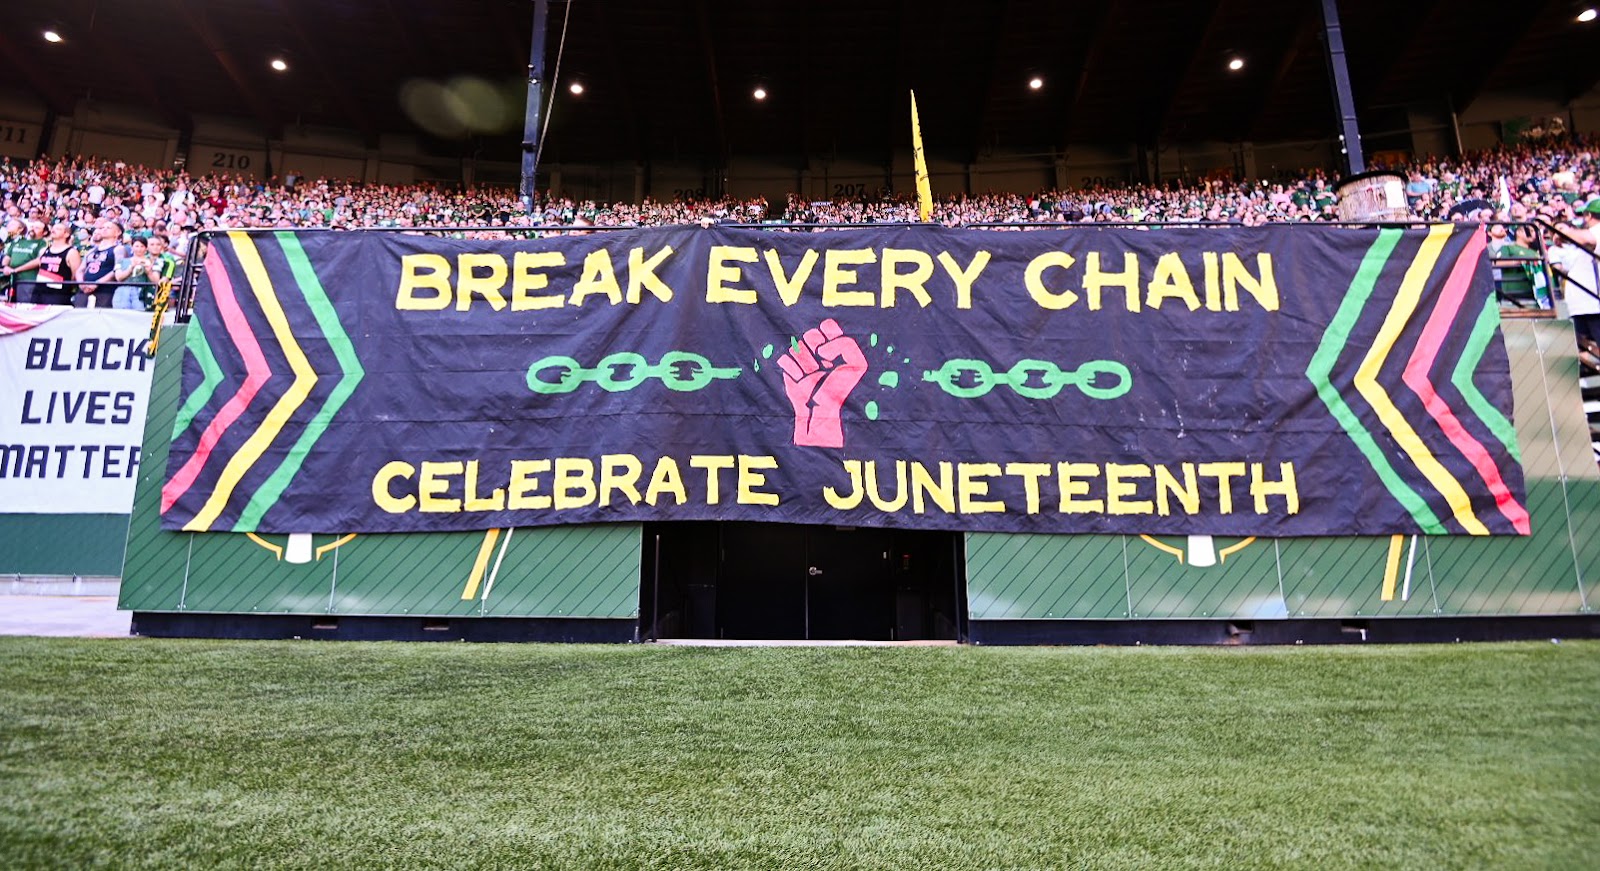 maintstage banner in Providence Park, black background with the words "BREAK EVERY CHAIN CELEBRATE JUNETEENTH" in yellow letters. There is a red fist going upwards through a green chain. Yellow, green, and red arrows on both sides of the banner pointing towards the message. 